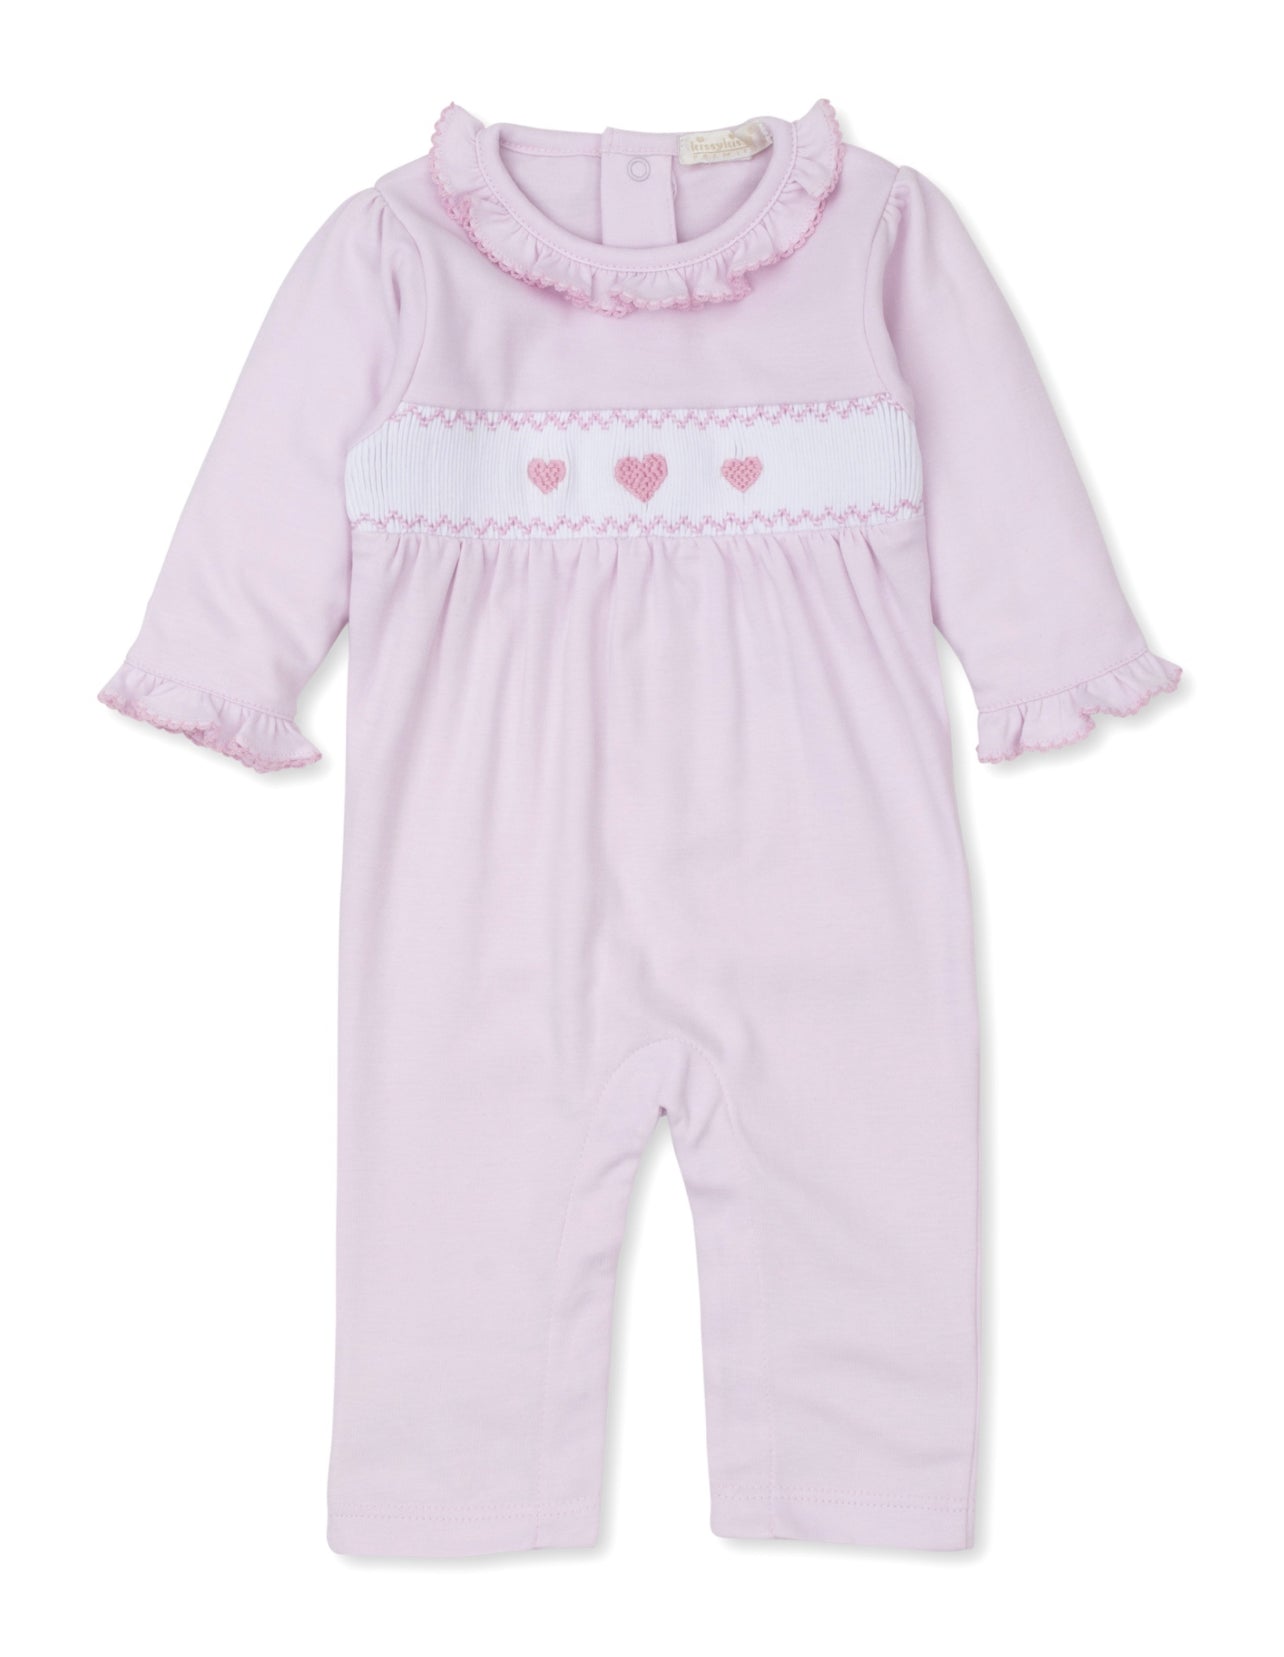 Heart Medley Playsuit w/ Hand Smocking Pink